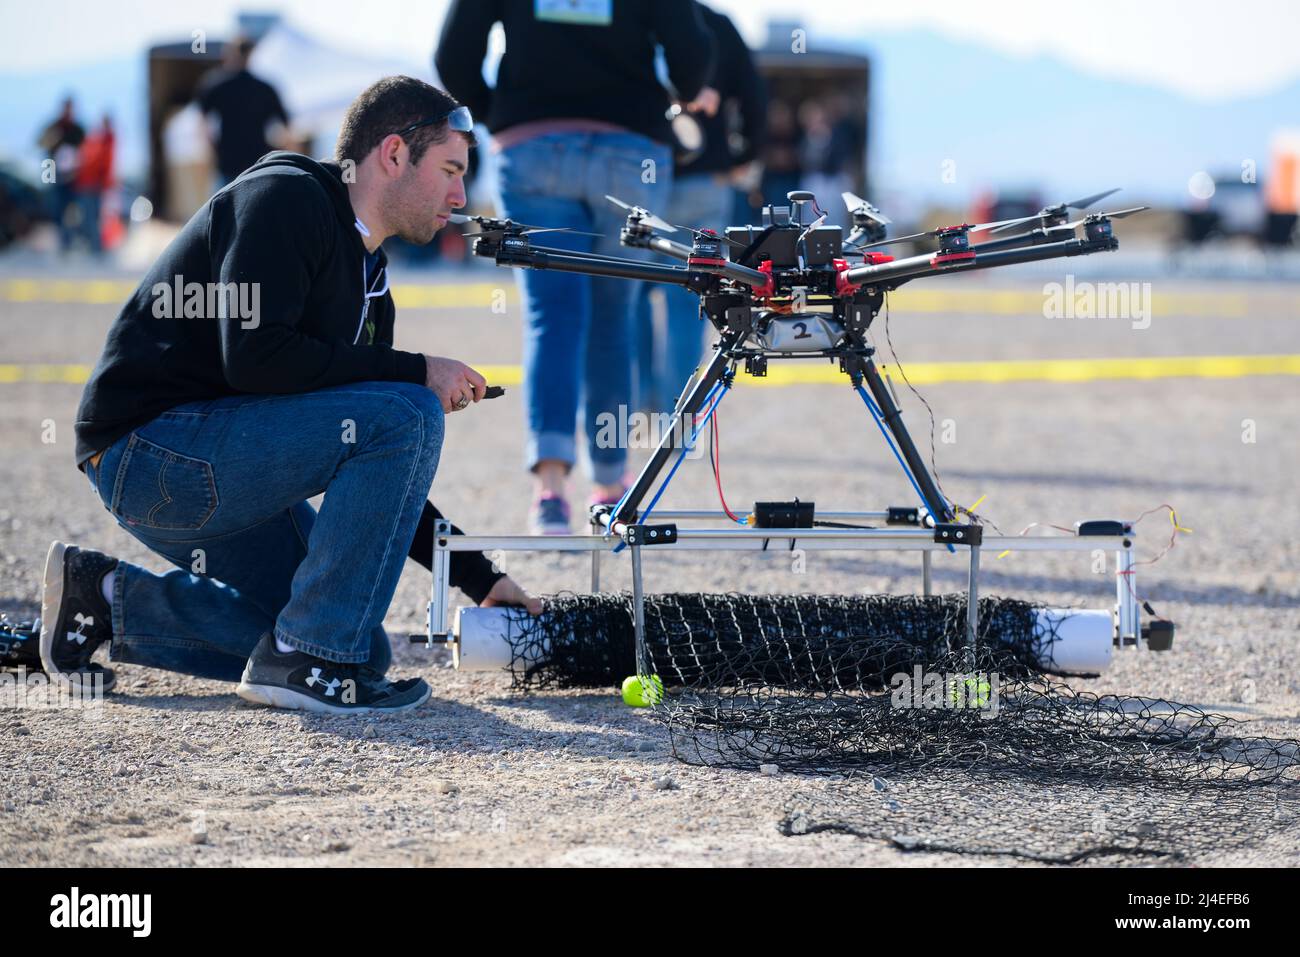 U.S. Air Force 2nd Lt David Feibus, with team Flying Gatorz from Wright-Patterson Air Force Base, Ohio, checks the attached net on his team's attack drone between scenarios during the 2016 Air Force Research Laboratory Commanders Challenge at the Nevada National Security Site, Las Vegas, NV., Dec. 13, 2016. Teams were given six months to develop a complete counter unmanned aerial system to aid in base defense. Wright-Patterson's system uses a camera and laser range finder to detect UAS devices and an attack drone with attached net for intercepting and retrieving them. (U.S. Air Force photo by Stock Photo